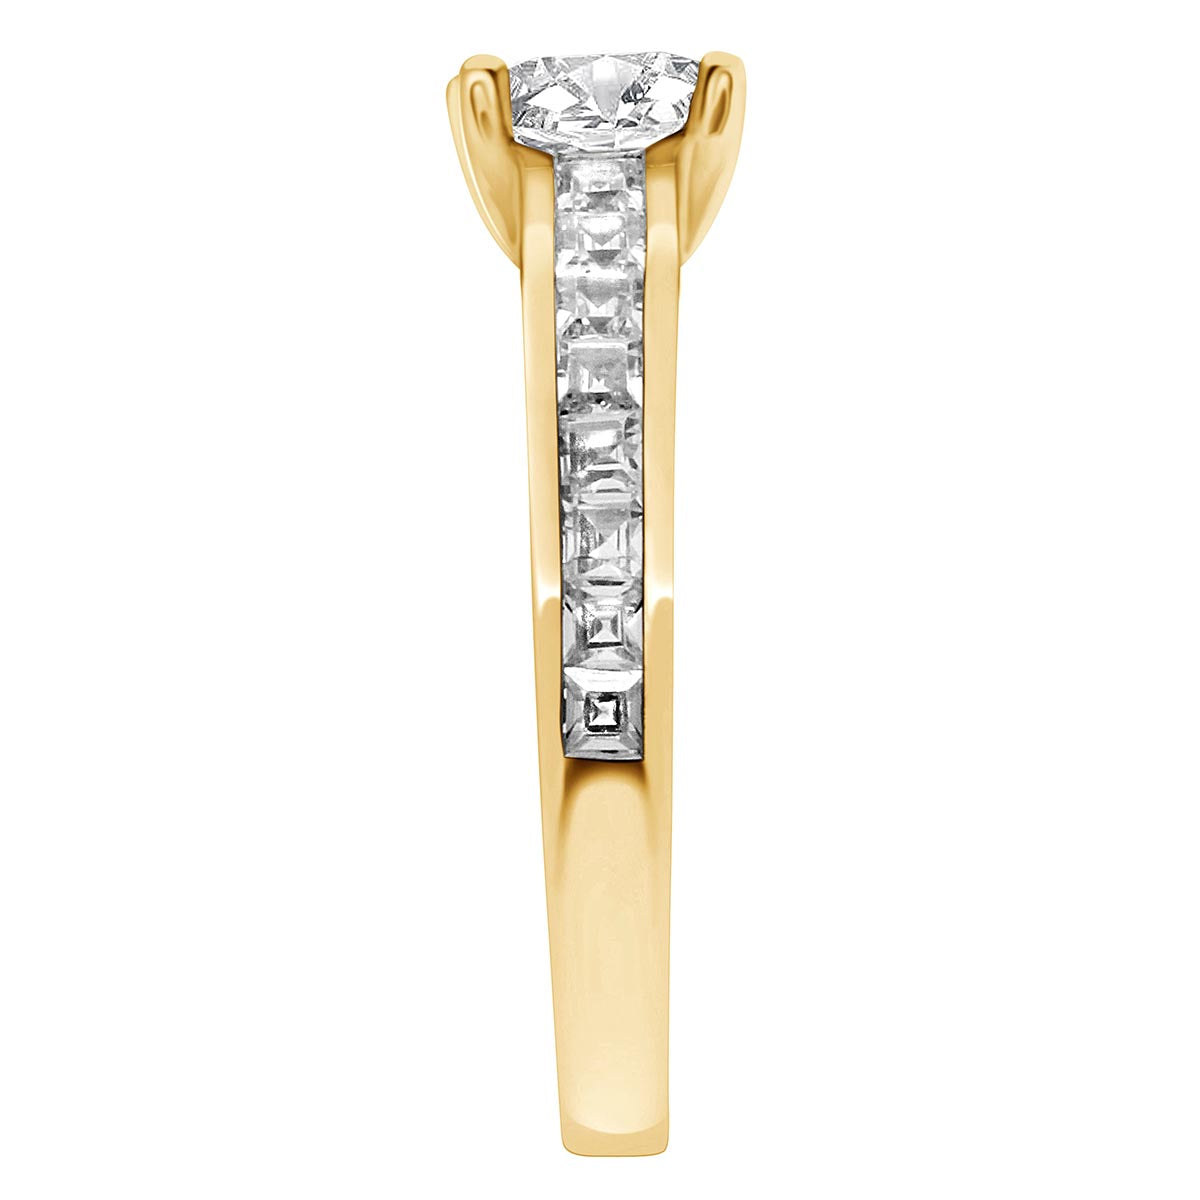 Princess Shape Diamond Ring made from yellow gold and standing upright in end view